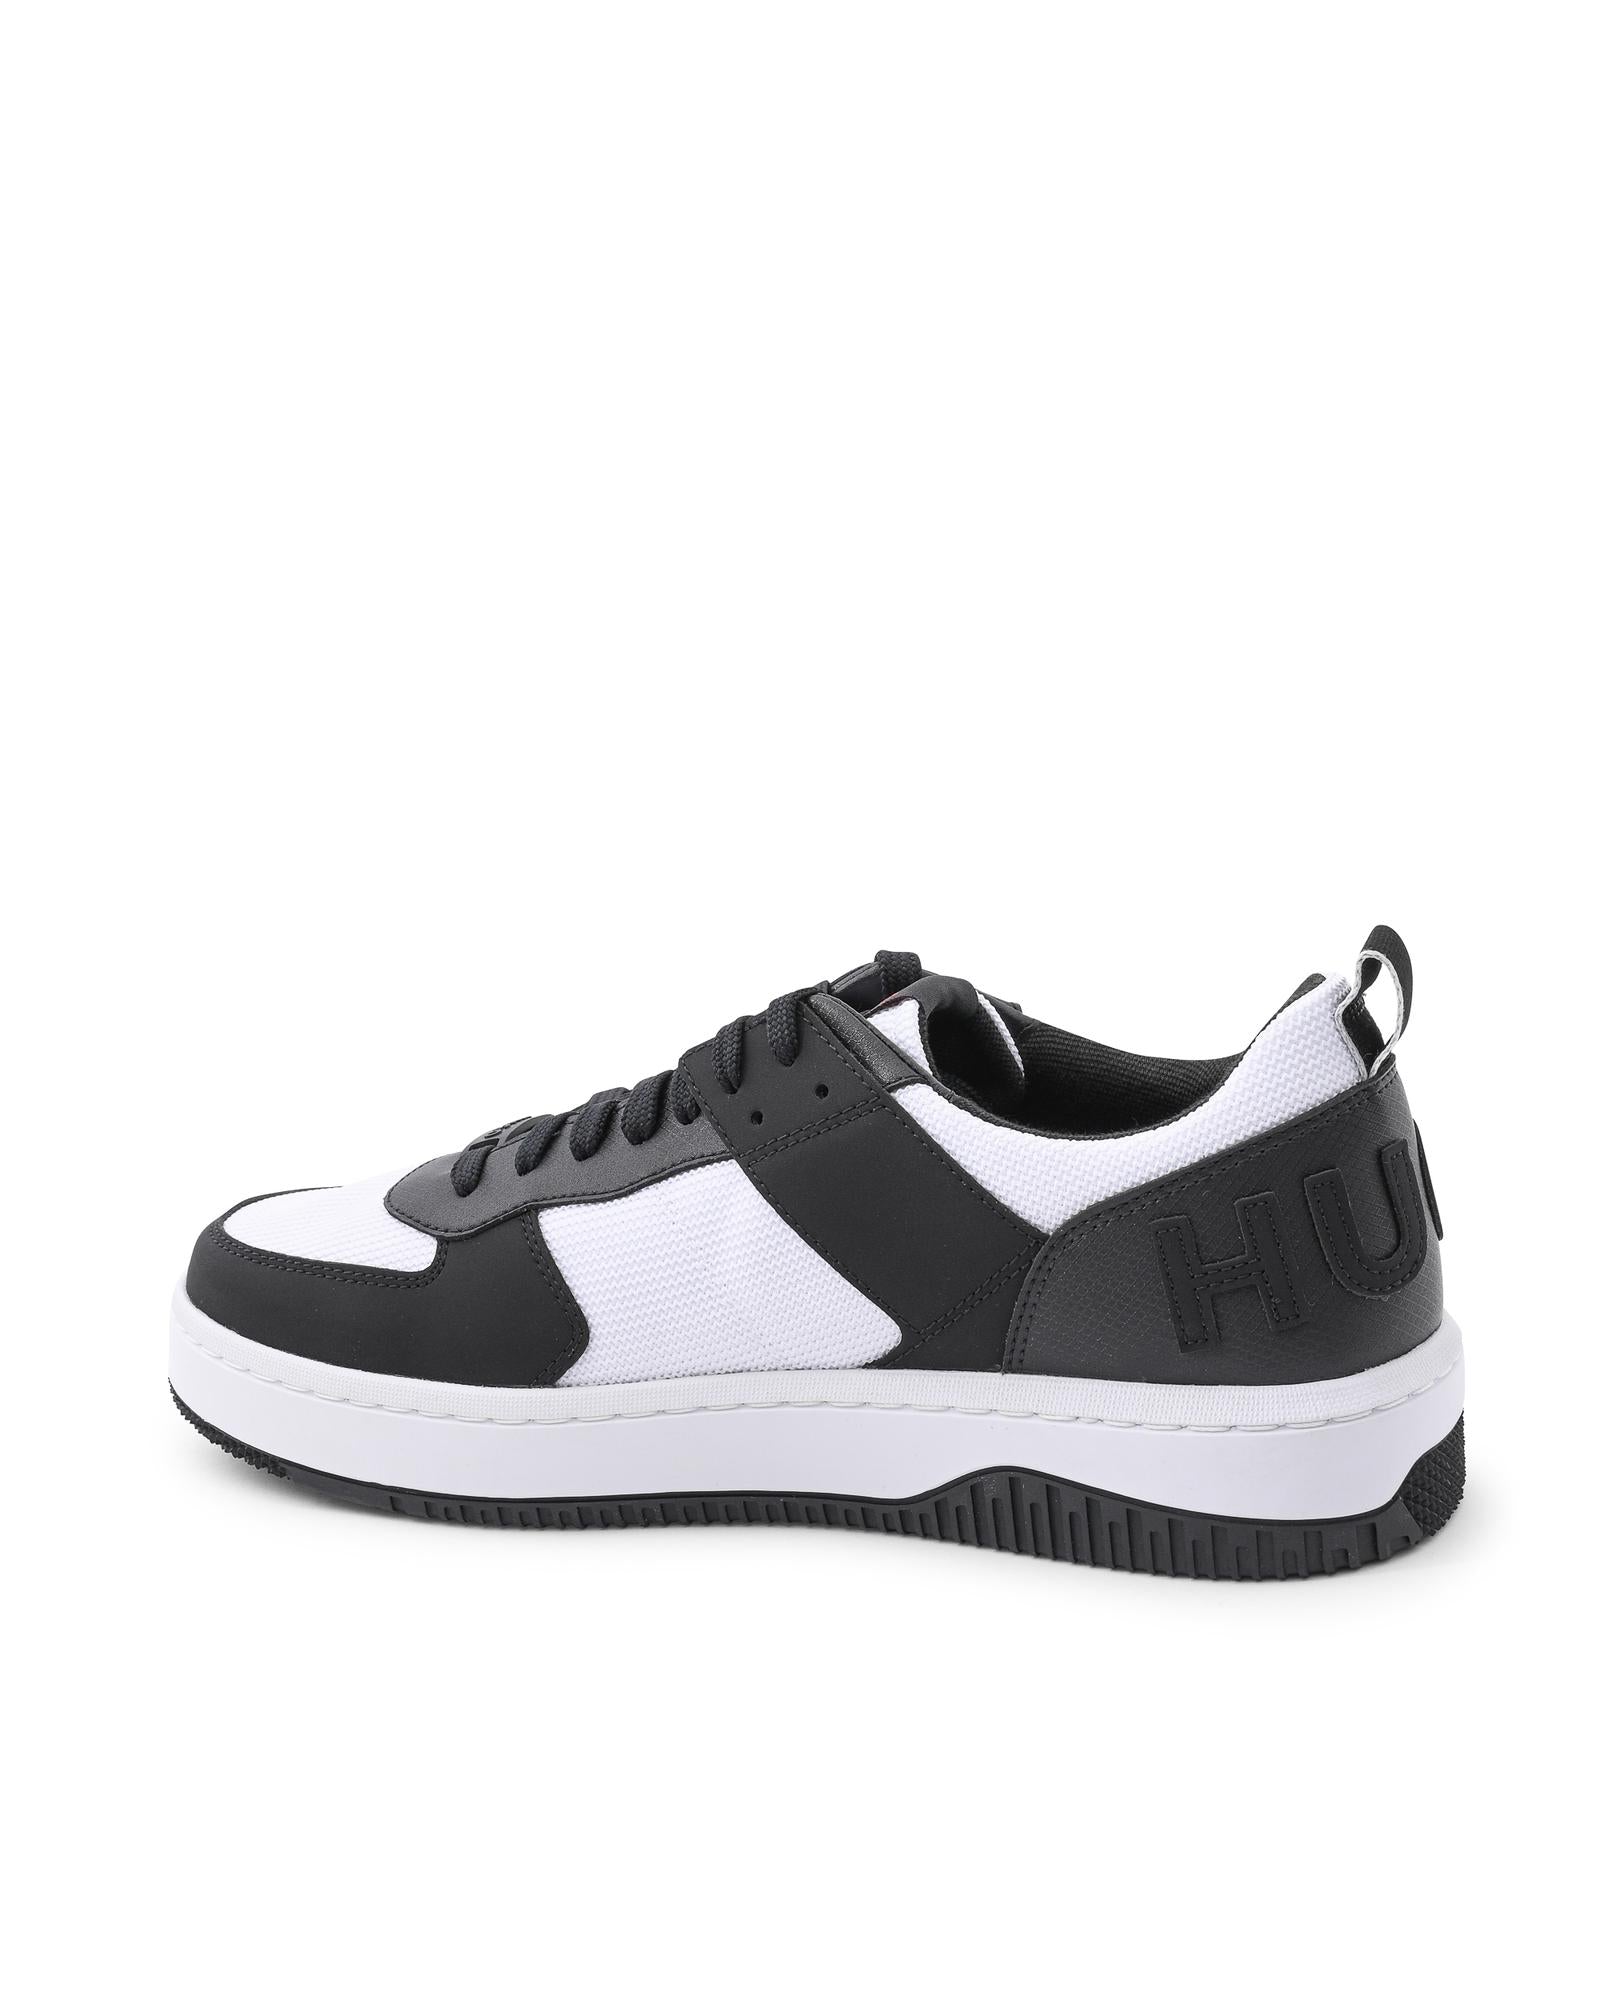 Men's Charcoal Calfskin Sneakers with Rubber Sole in Multicolor - 45 EU